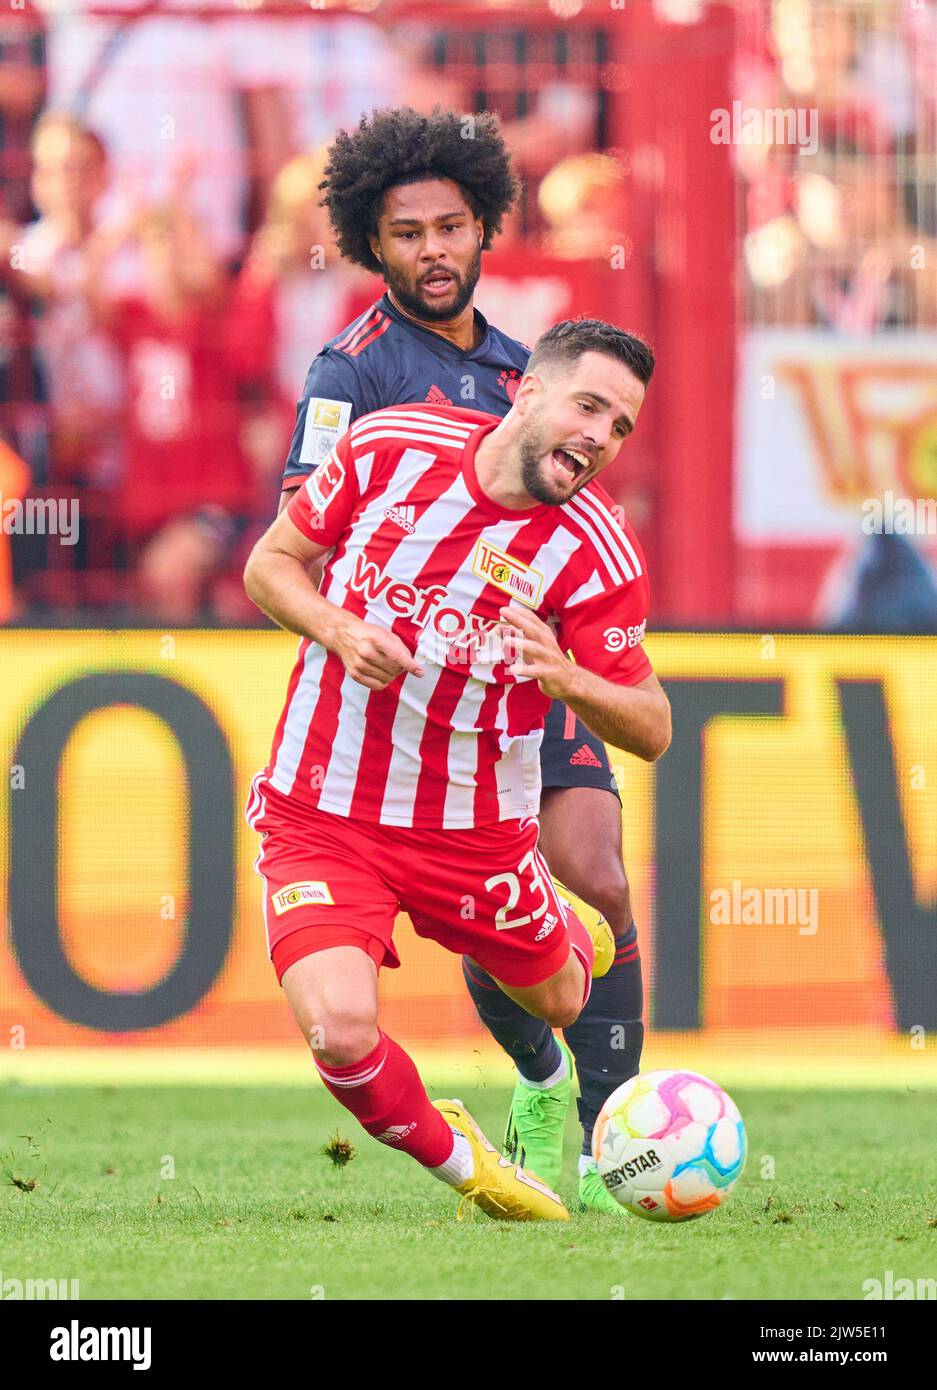 Serge GNABRY, FCB 7  compete for the ball, tackling, duel, header, zweikampf, action, fight against Niko Giesselmann, Union Berlin 23  in the match 1.FC UNION BERLIN - FC BAYERN MUENCHEN 1-1 1.German Football League on Sept 3, 2022 in Berlin, Germany. Season 2022/2023, matchday 5, 1.Bundesliga, FCB, München, 5.Spieltag. © Peter Schatz / Alamy Live News    - DFL REGULATIONS PROHIBIT ANY USE OF PHOTOGRAPHS as IMAGE SEQUENCES and/or QUASI-VIDEO - Stock Photo